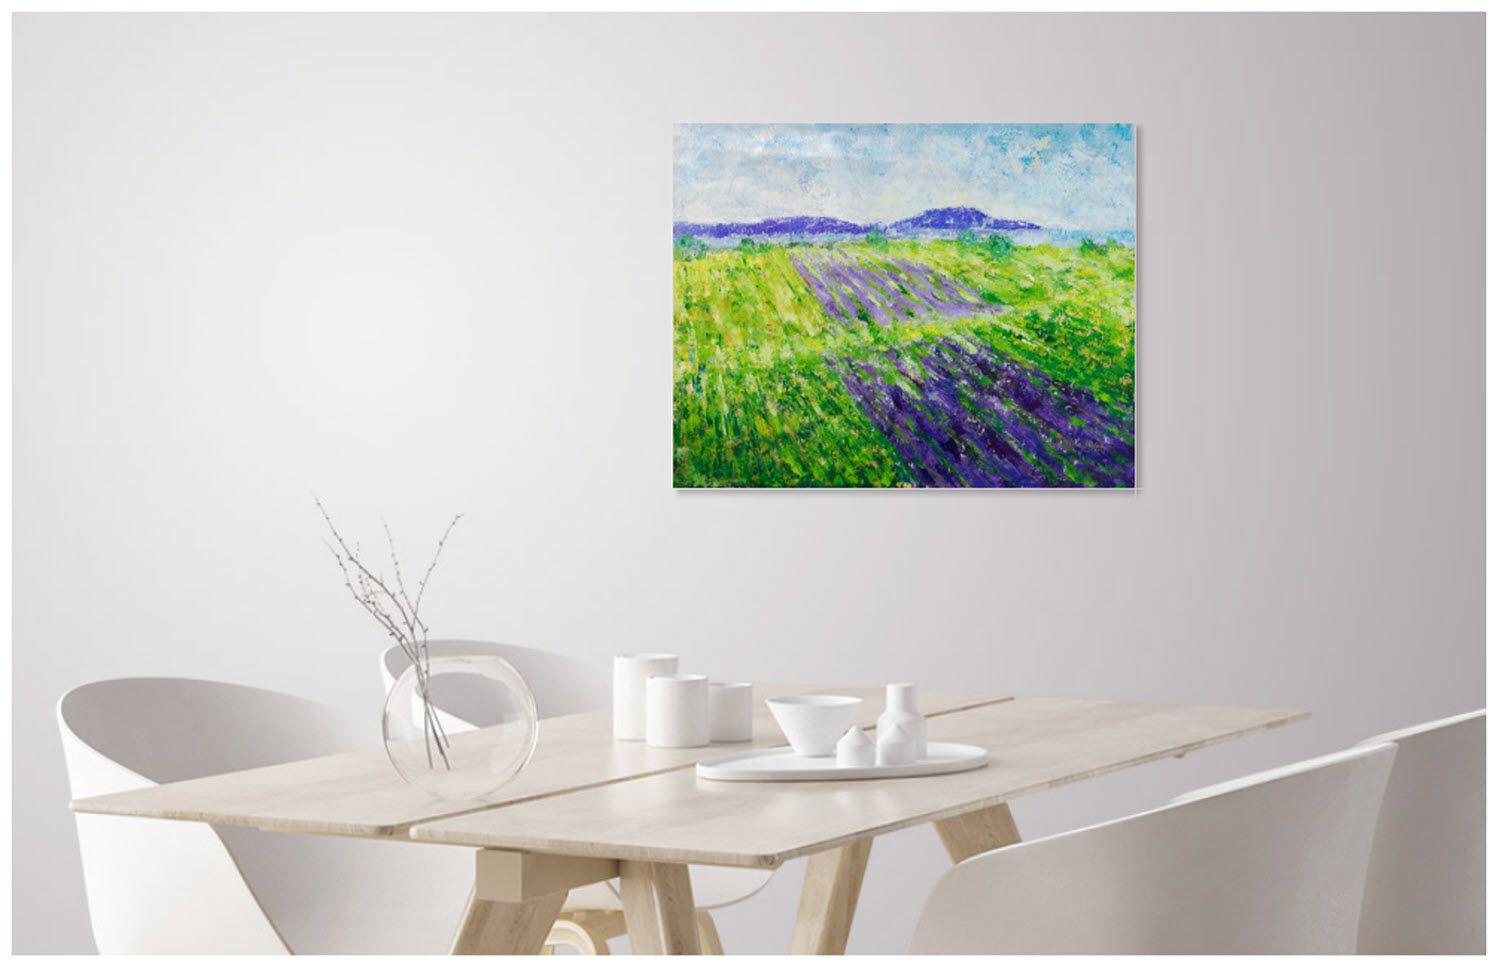 Lavender fields    Contrasts of Green and Purple colors. In this painting with lavender fields I've tried to use bright colors to make an homage to Spring and Summer seasons.    The painting 'Lavender fields' has been created in Acrylic on